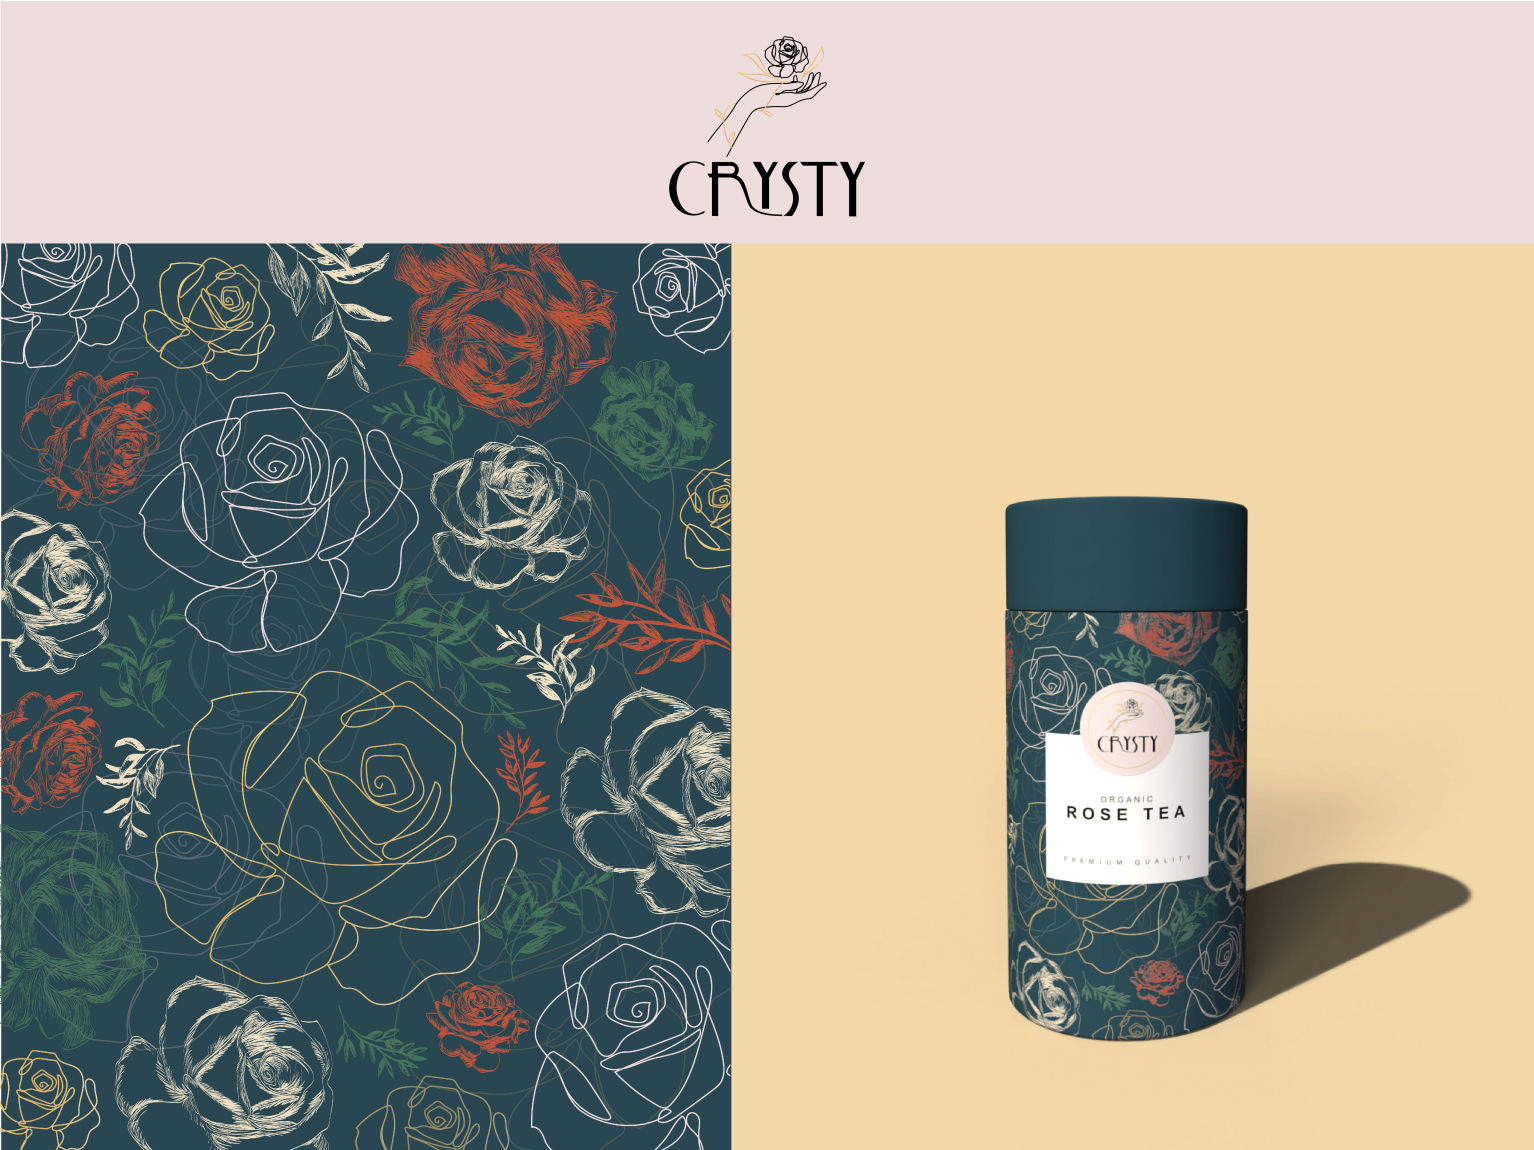 Crysty Tea by Natcha on Dribbble